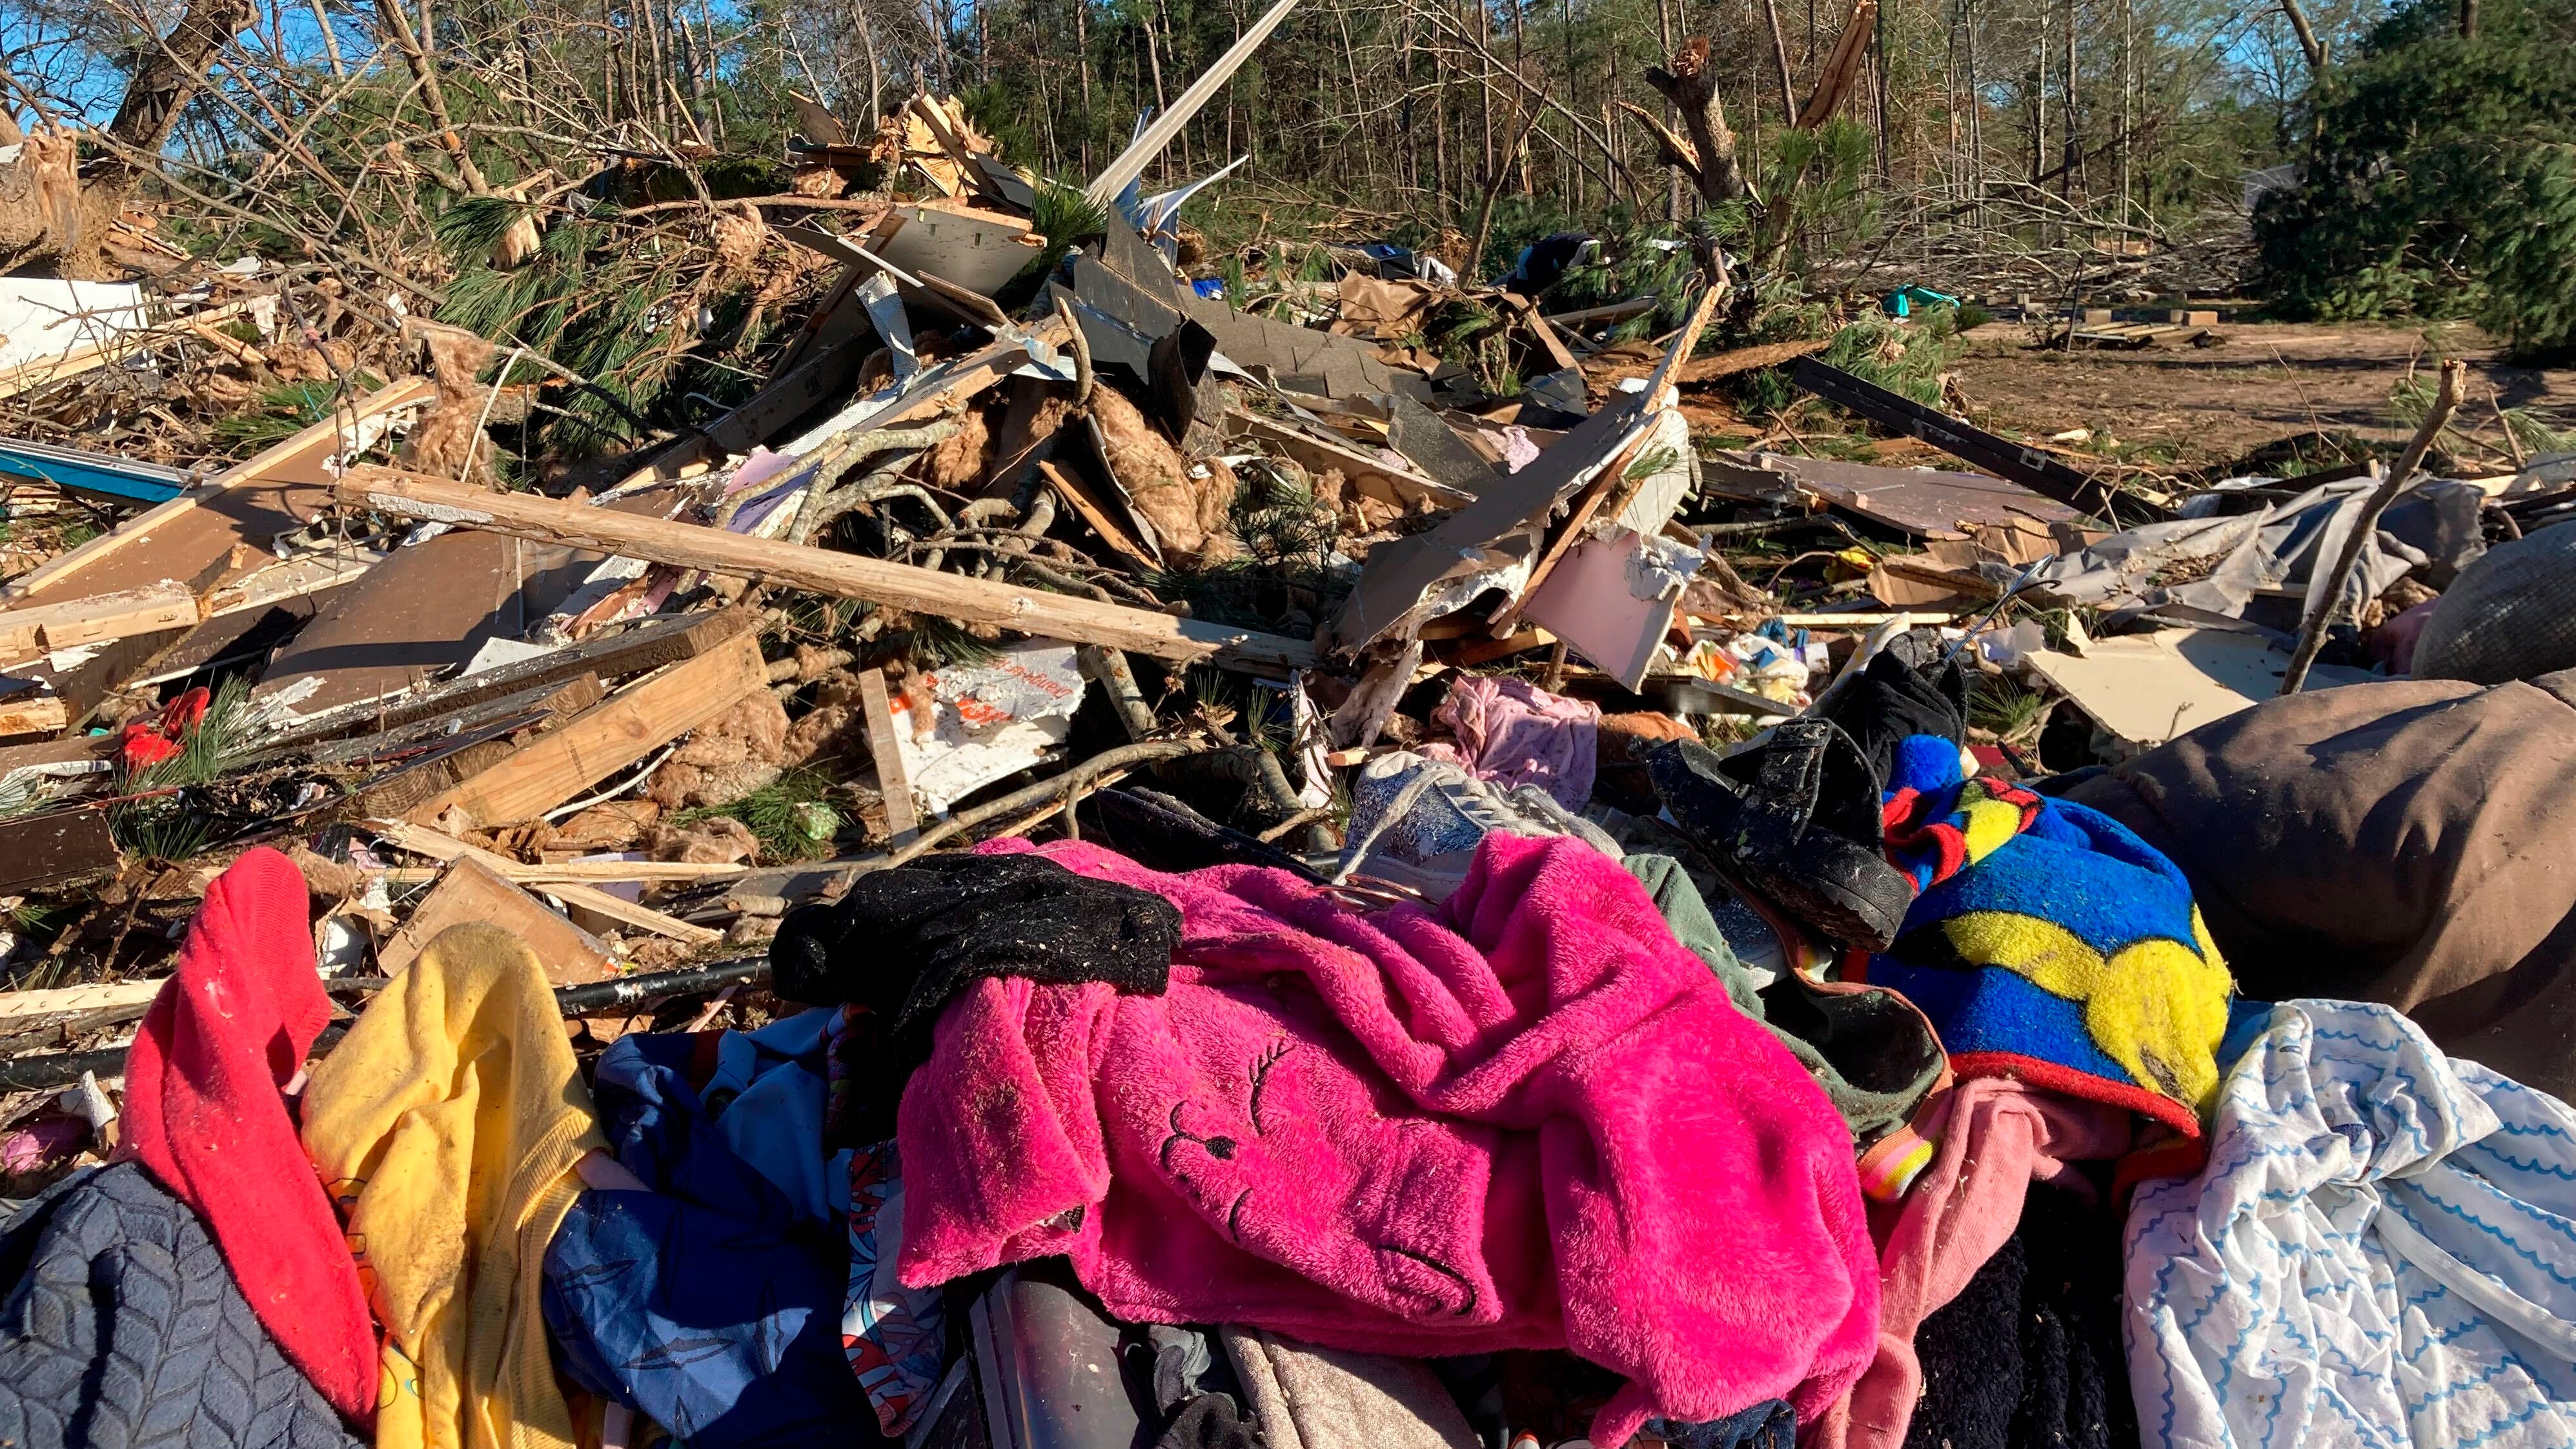 Debris is piled up following severe weather Wednesday, Dec. 14, 2022, in Keithville, La. A volatile storm ripping across the U.S. spawned tornadoes that killed a young boy and his mother in Keithville.